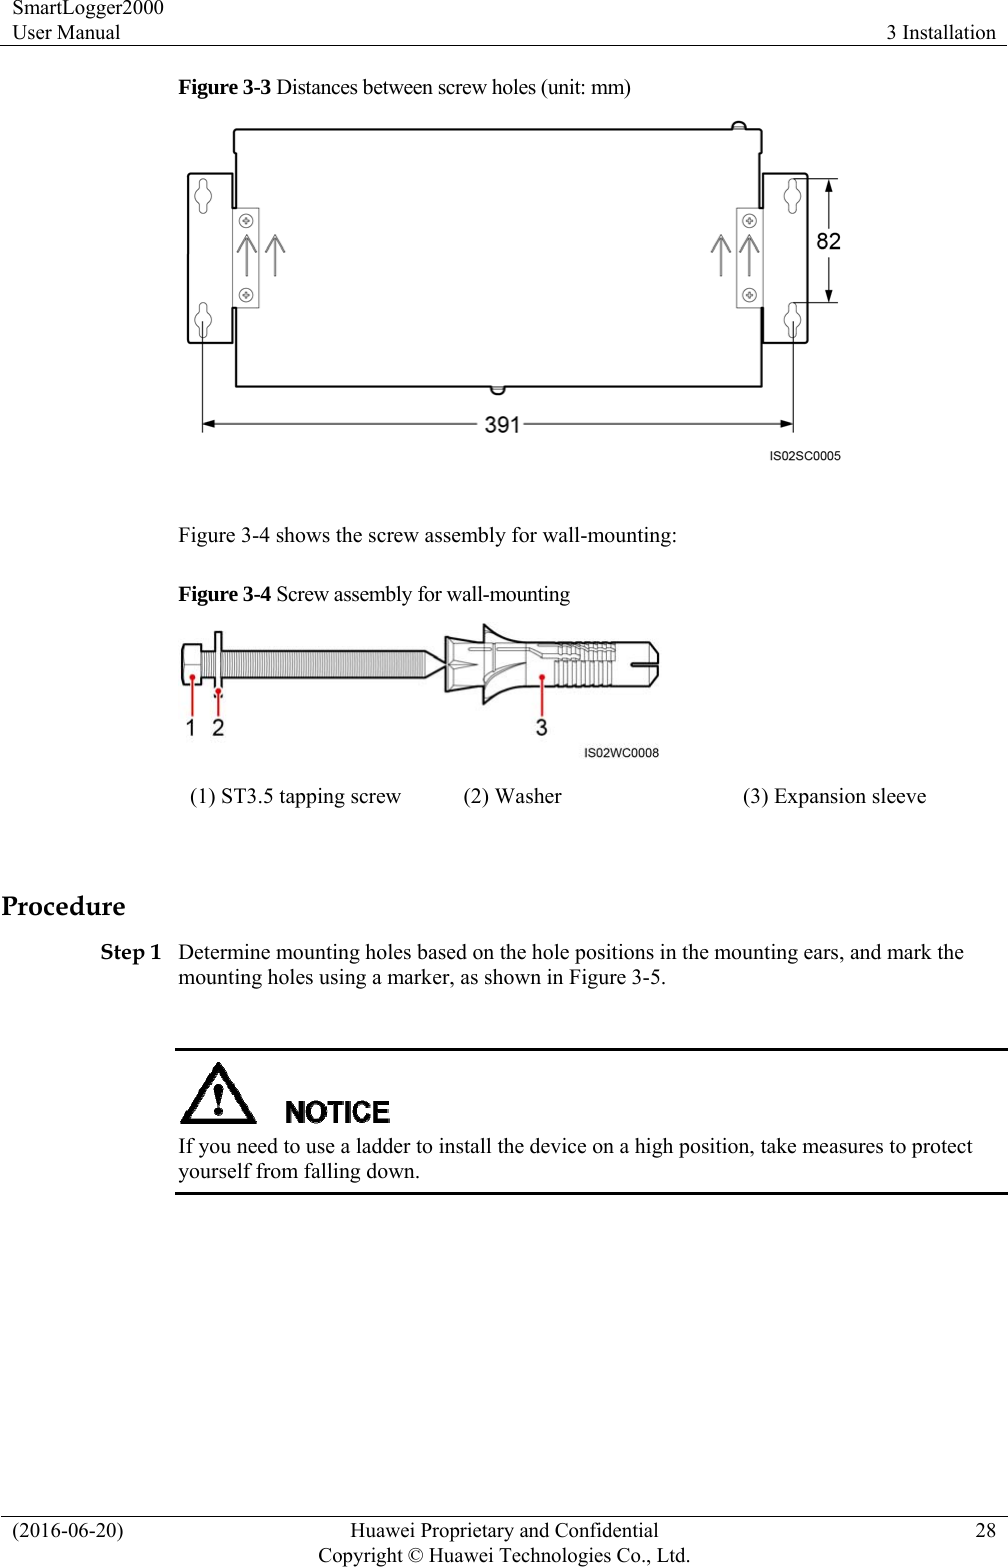 SmartLogger2000 User Manual  3 Installation (2016-06-20)  Huawei Proprietary and Confidential         Copyright © Huawei Technologies Co., Ltd.28 Figure 3-3 Distances between screw holes (unit: mm)   Figure 3-4 shows the screw assembly for wall-mounting:   Figure 3-4 Screw assembly for wall-mounting  (1) ST3.5 tapping screw  (2) Washer  (3) Expansion sleeve  Procedure Step 1 Determine mounting holes based on the hole positions in the mounting ears, and mark the mounting holes using a marker, as shown in Figure 3-5.   If you need to use a ladder to install the device on a high position, take measures to protect yourself from falling down.   